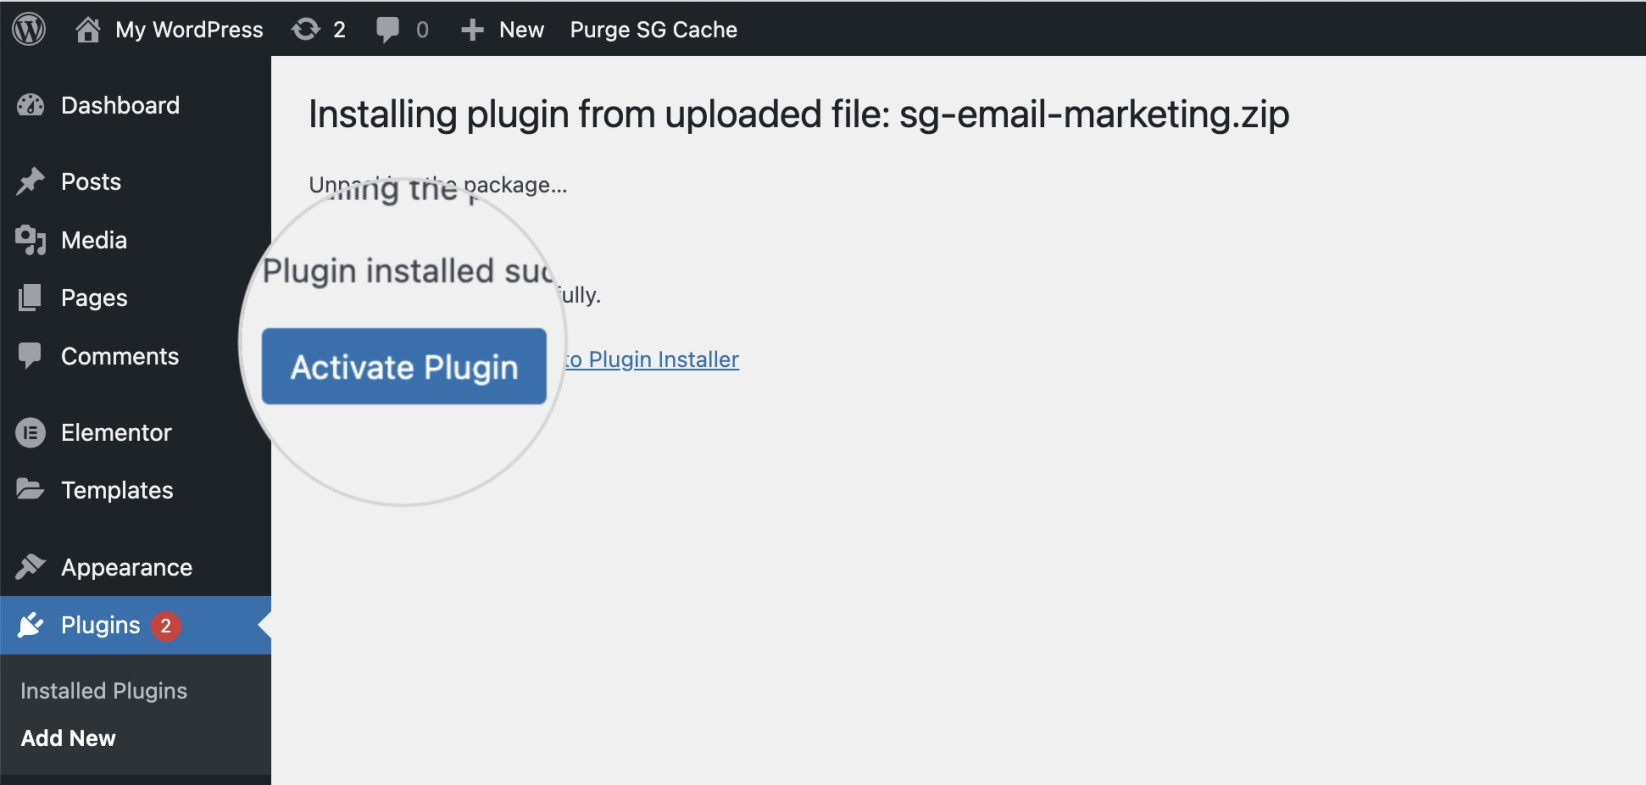 How to activate the Email Marketing plugin on your WordPress site